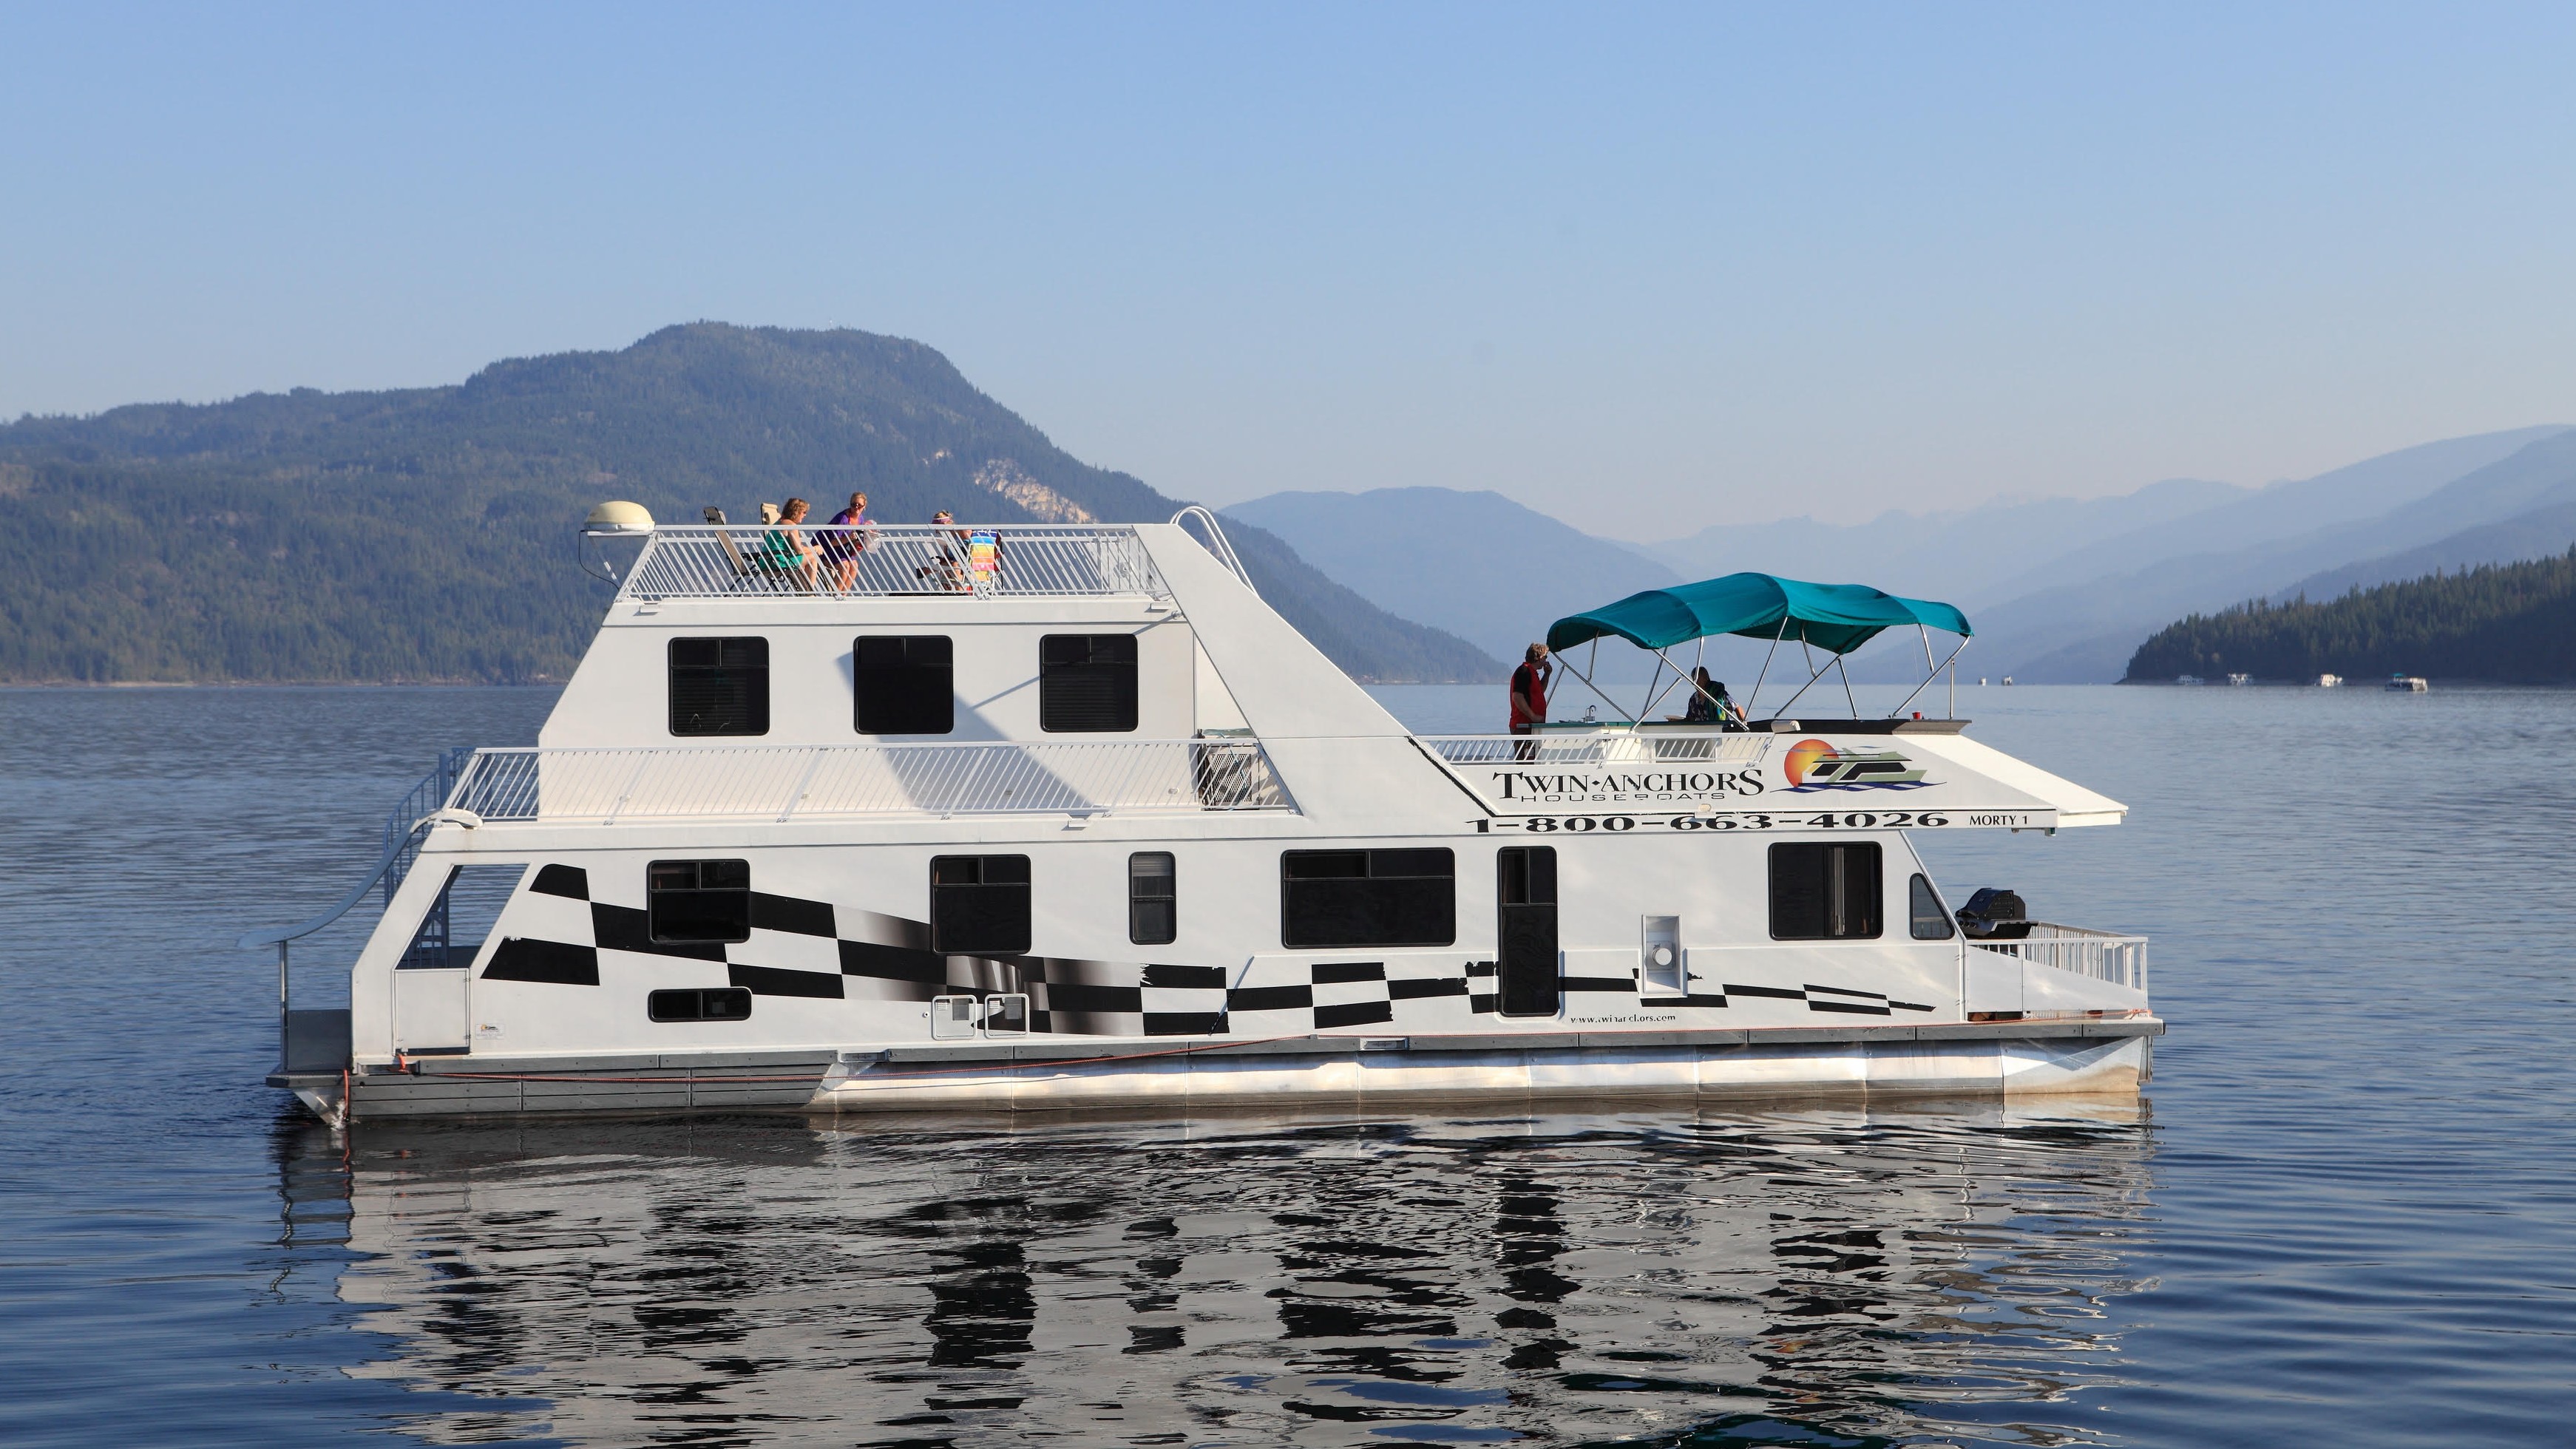 Houseboat Trip from Twin Achors Houseboat Vacations